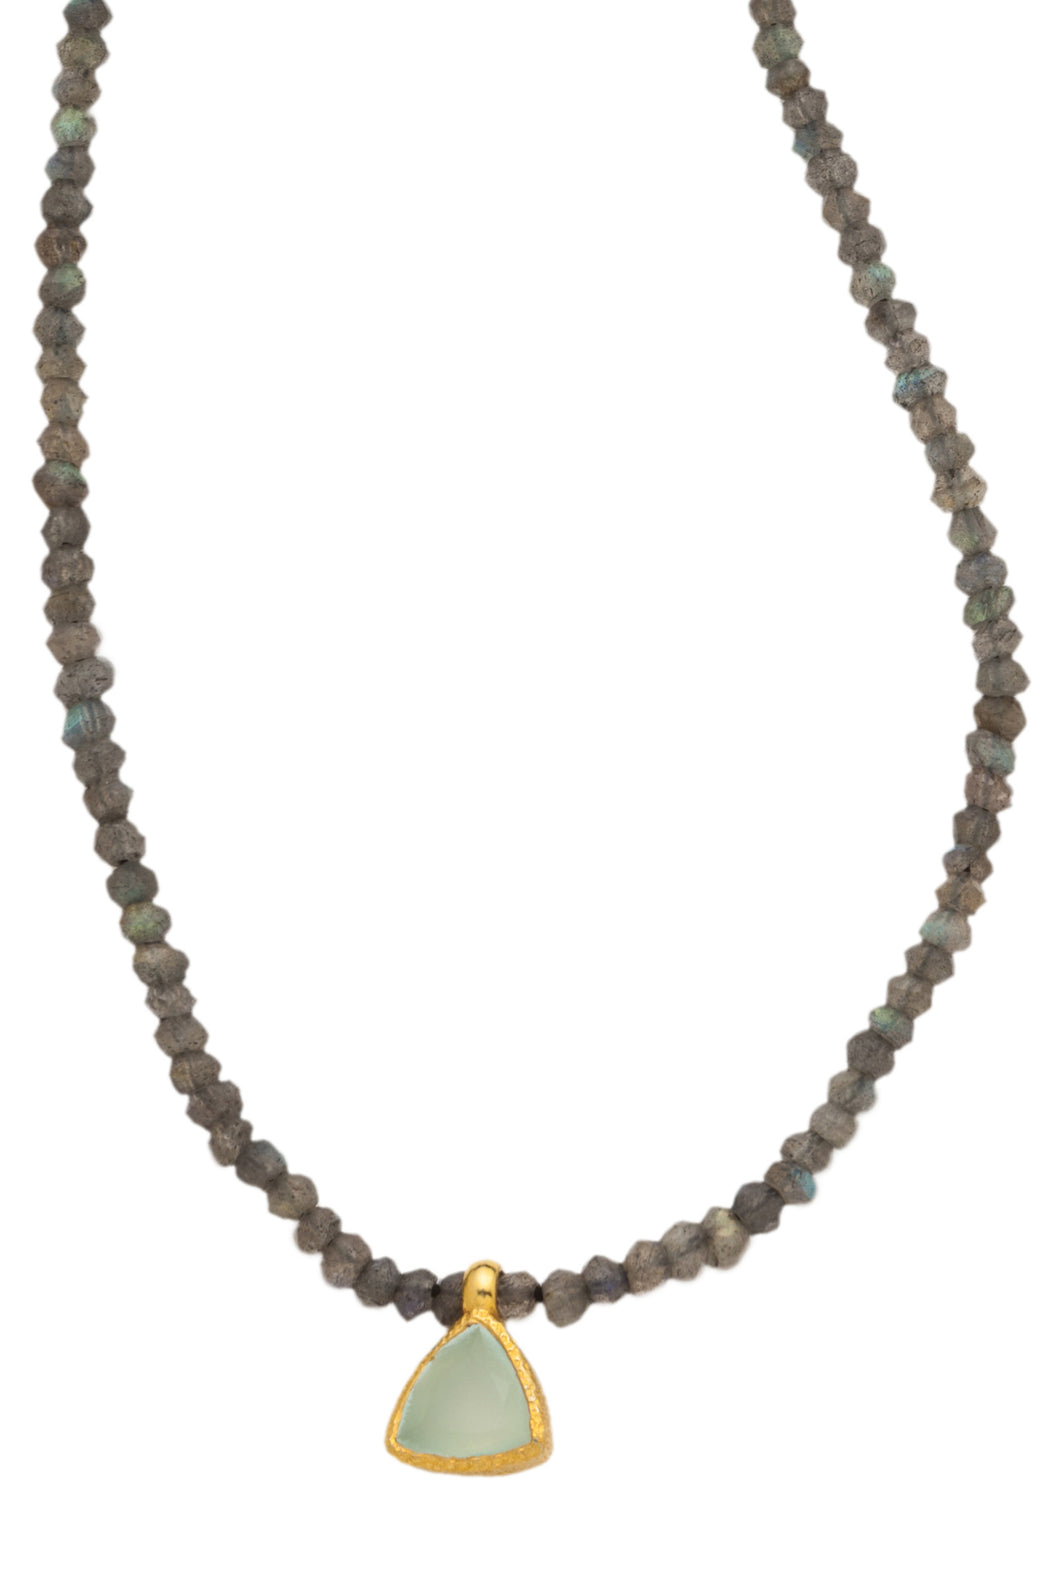 Labradorite faceted gemstone necklace with handmade pendant of Chalcedony set in 24kt gold vermeil NF188-LC